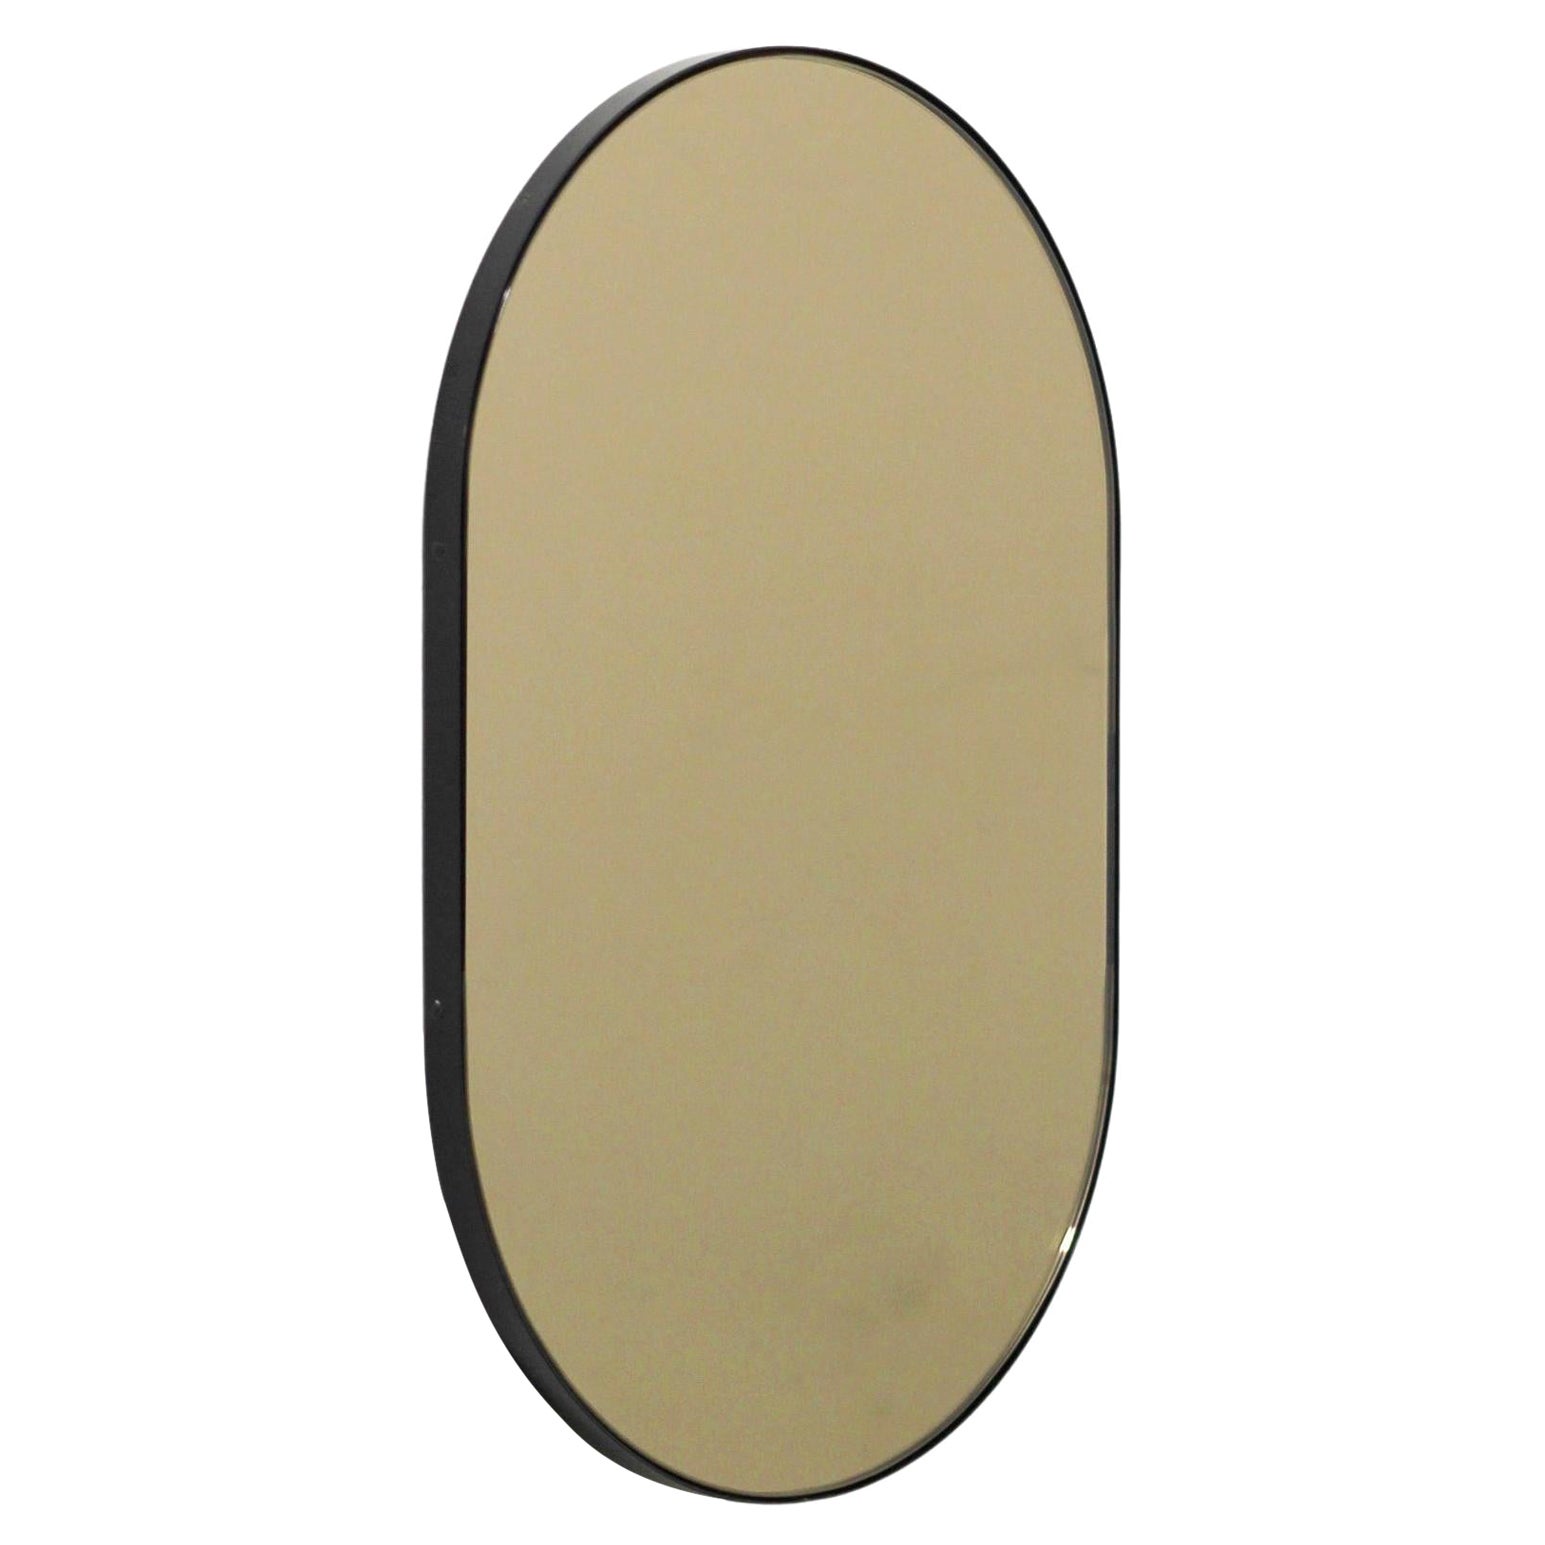 Capsula Capsule Pill shaped Bronze Modern Mirror with Black Frame, XL